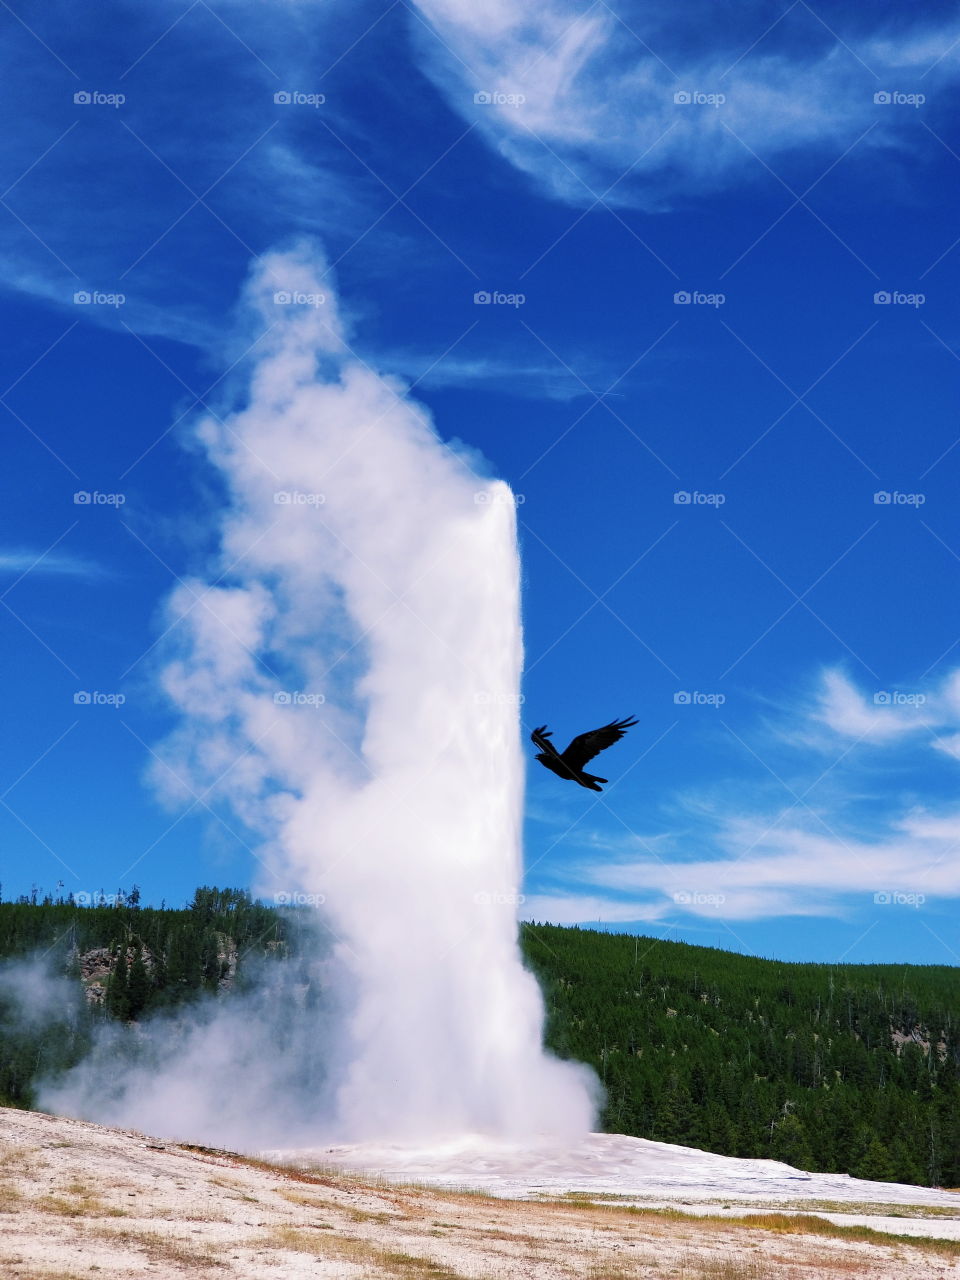 Good' Ol faithful, Yellowstone National Park.
Old Faithful was the first named geyser in YNP.

In the early days of the park, genius human race sometimes used the geyser to wash their clothes. 